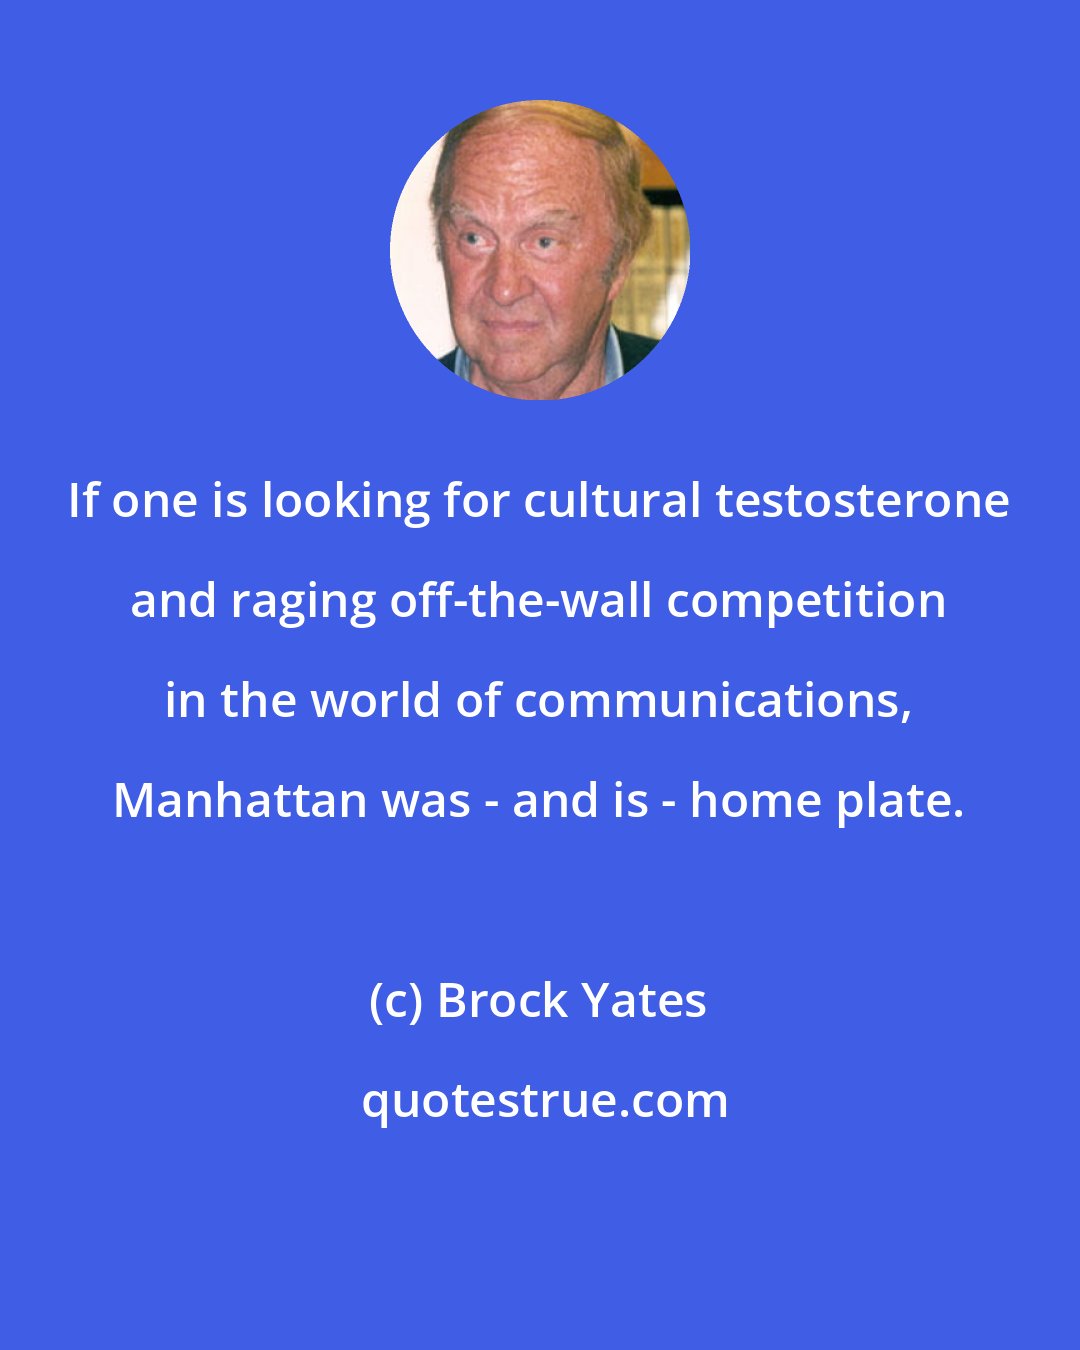 Brock Yates: If one is looking for cultural testosterone and raging off-the-wall competition in the world of communications, Manhattan was - and is - home plate.